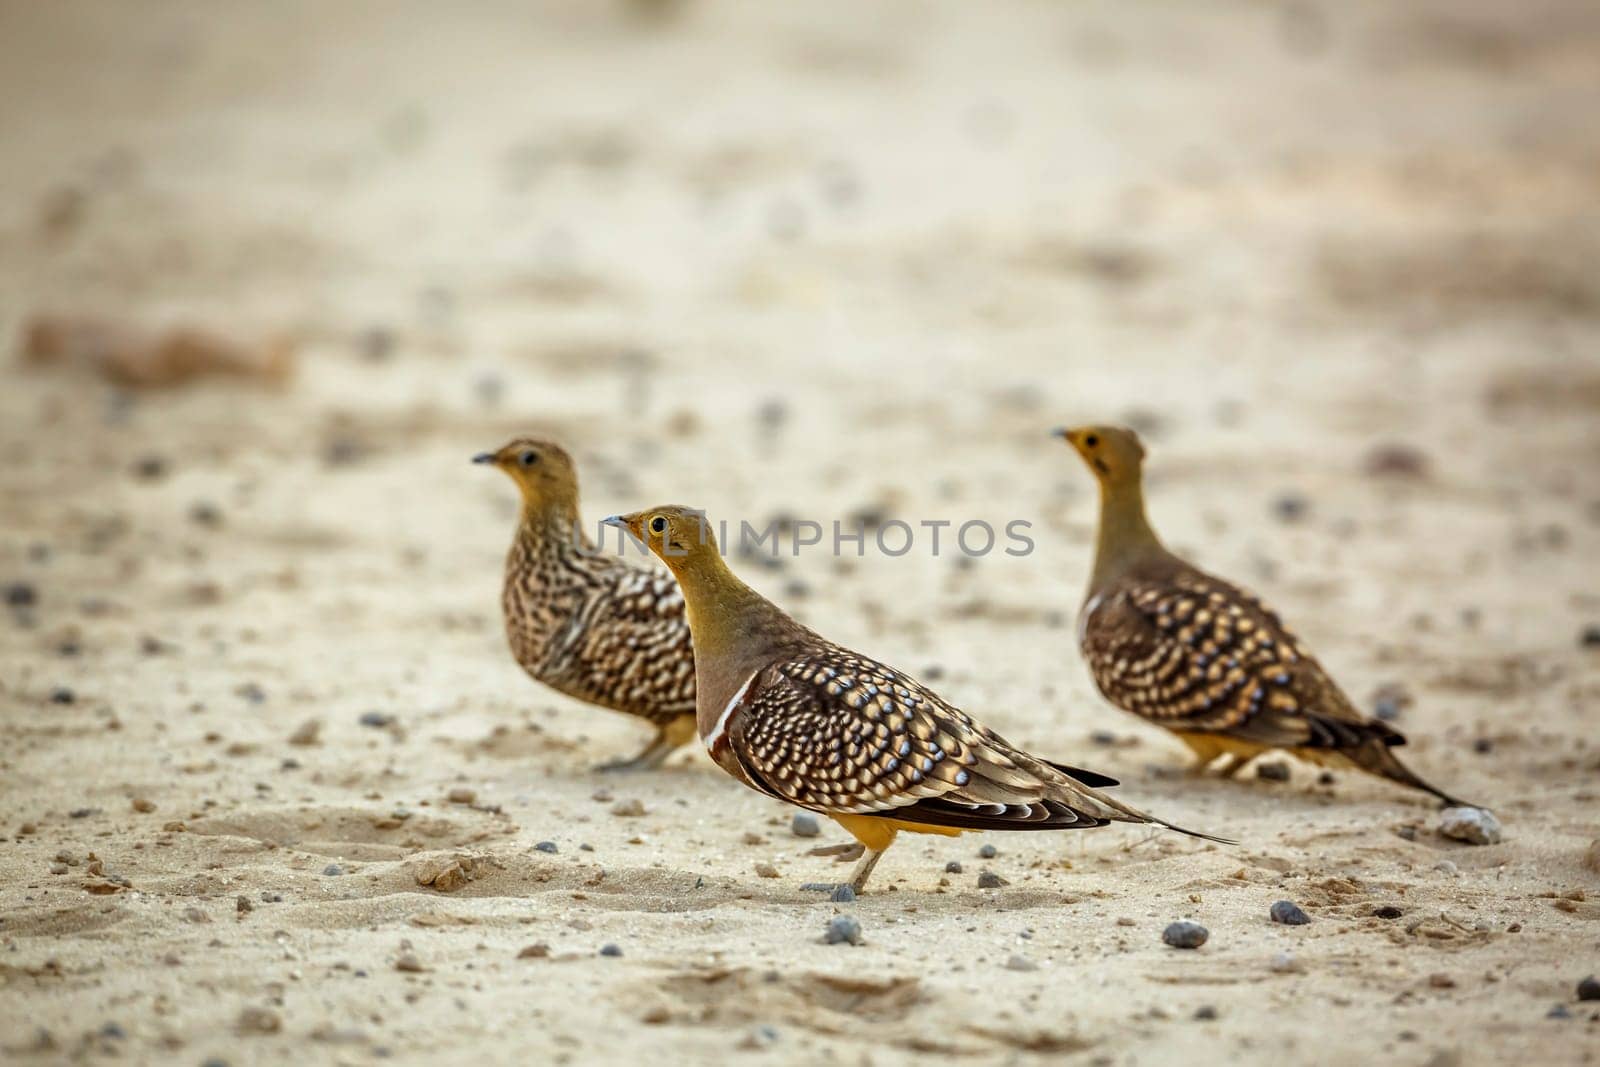 Namaqua sandgrouse in Kgalagadi transfrontier park, South Africa by PACOCOMO